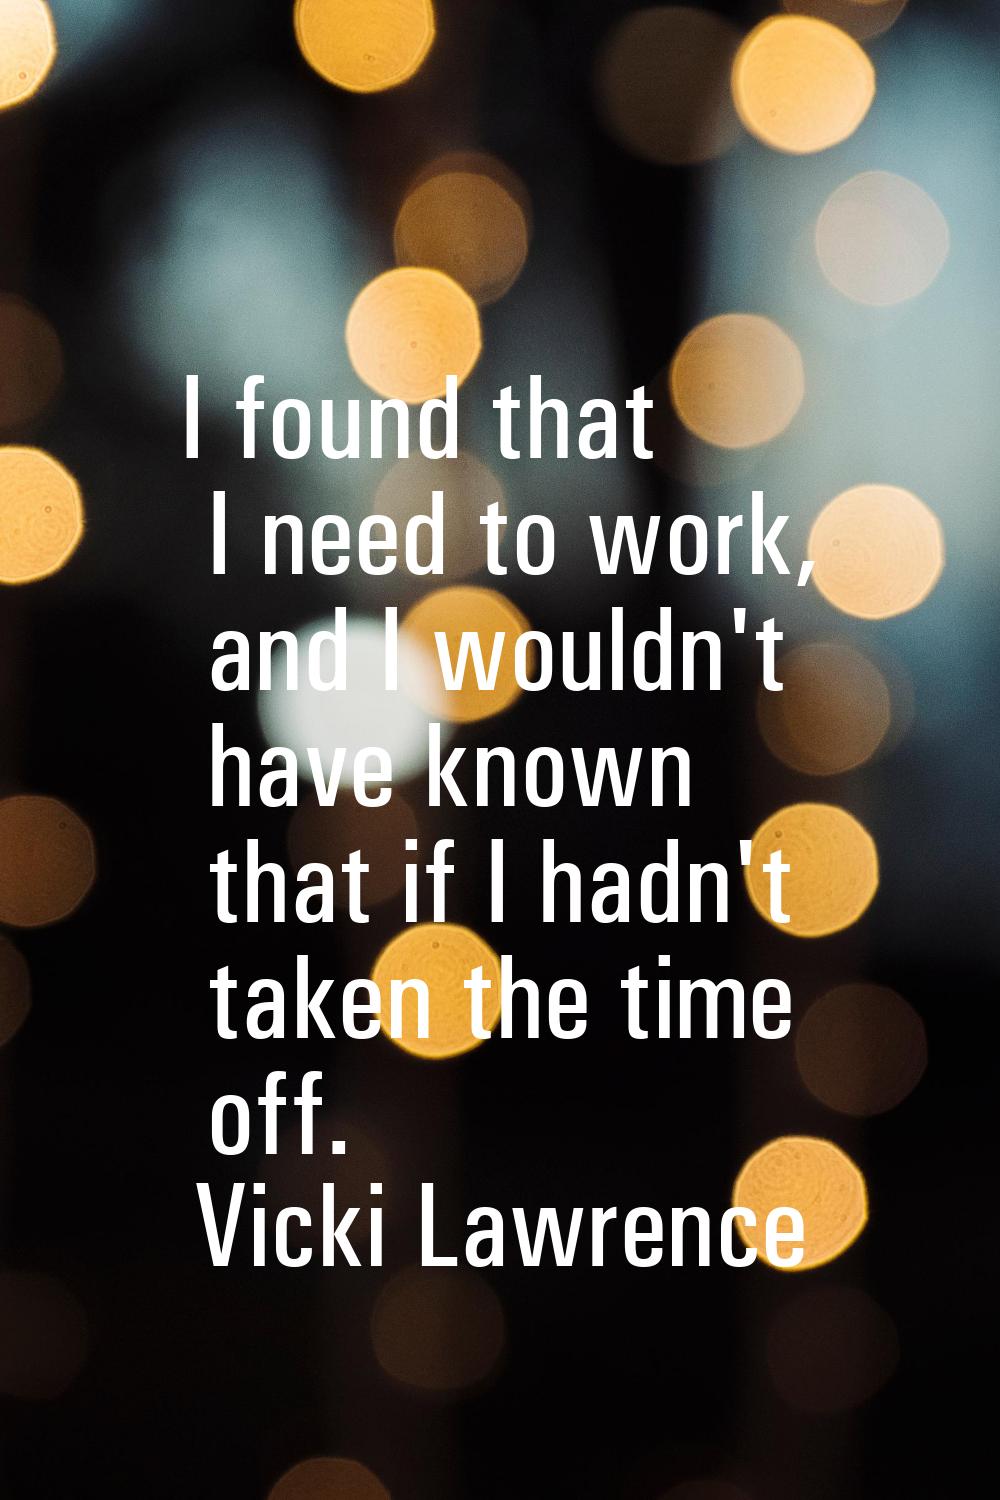 I found that I need to work, and I wouldn't have known that if I hadn't taken the time off.